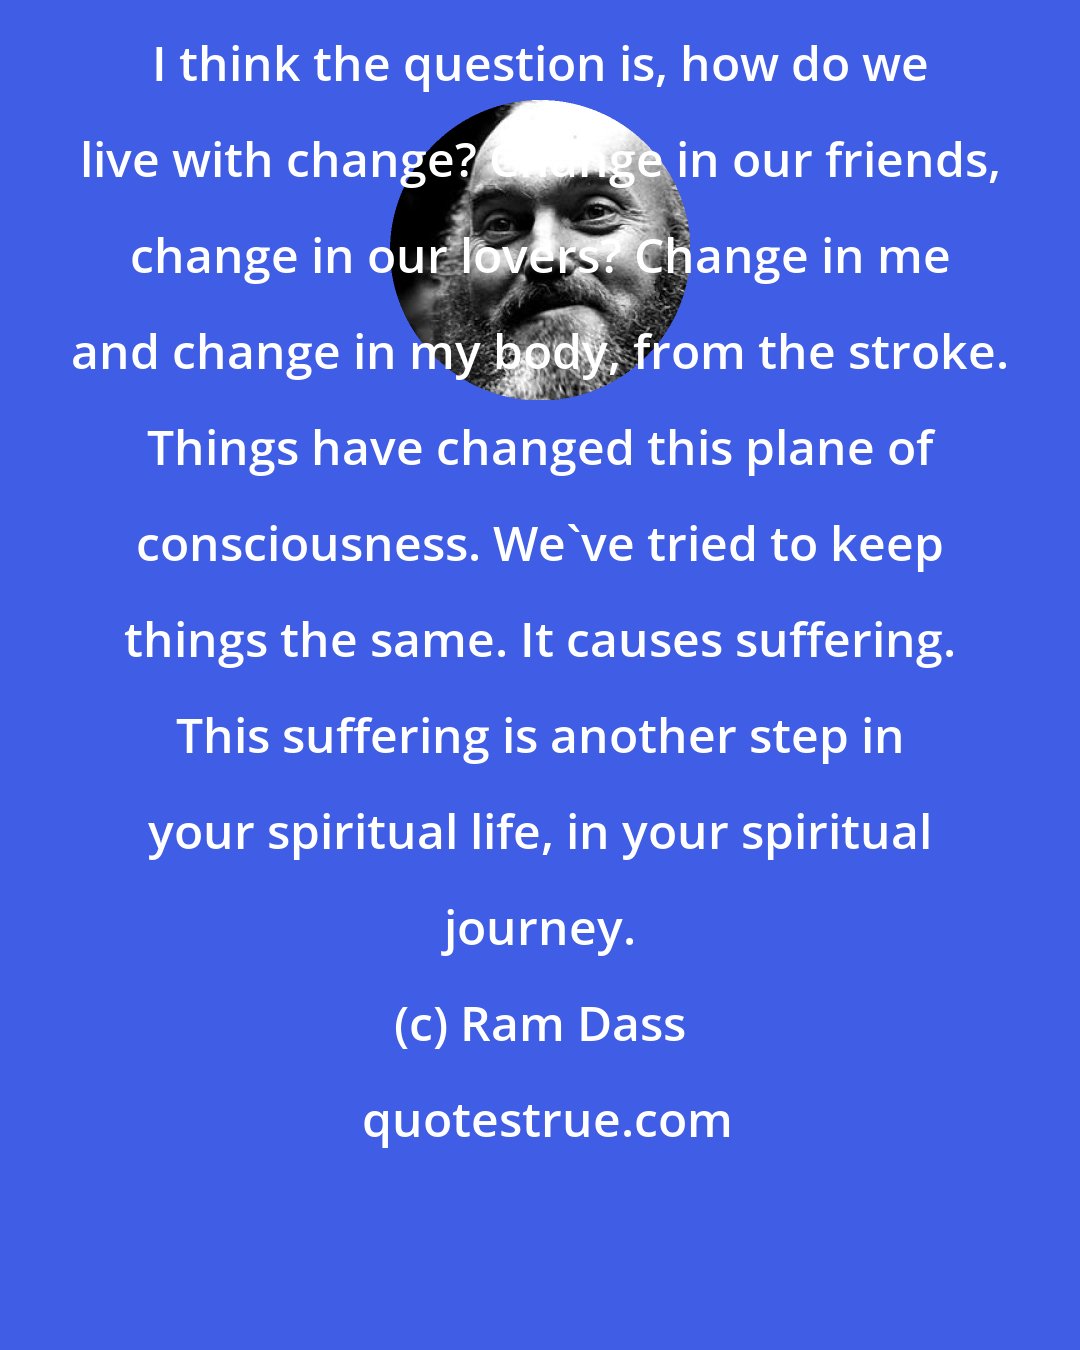 Ram Dass: I think the question is, how do we live with change? Change in our friends, change in our lovers? Change in me and change in my body, from the stroke. Things have changed this plane of consciousness. We've tried to keep things the same. It causes suffering. This suffering is another step in your spiritual life, in your spiritual journey.